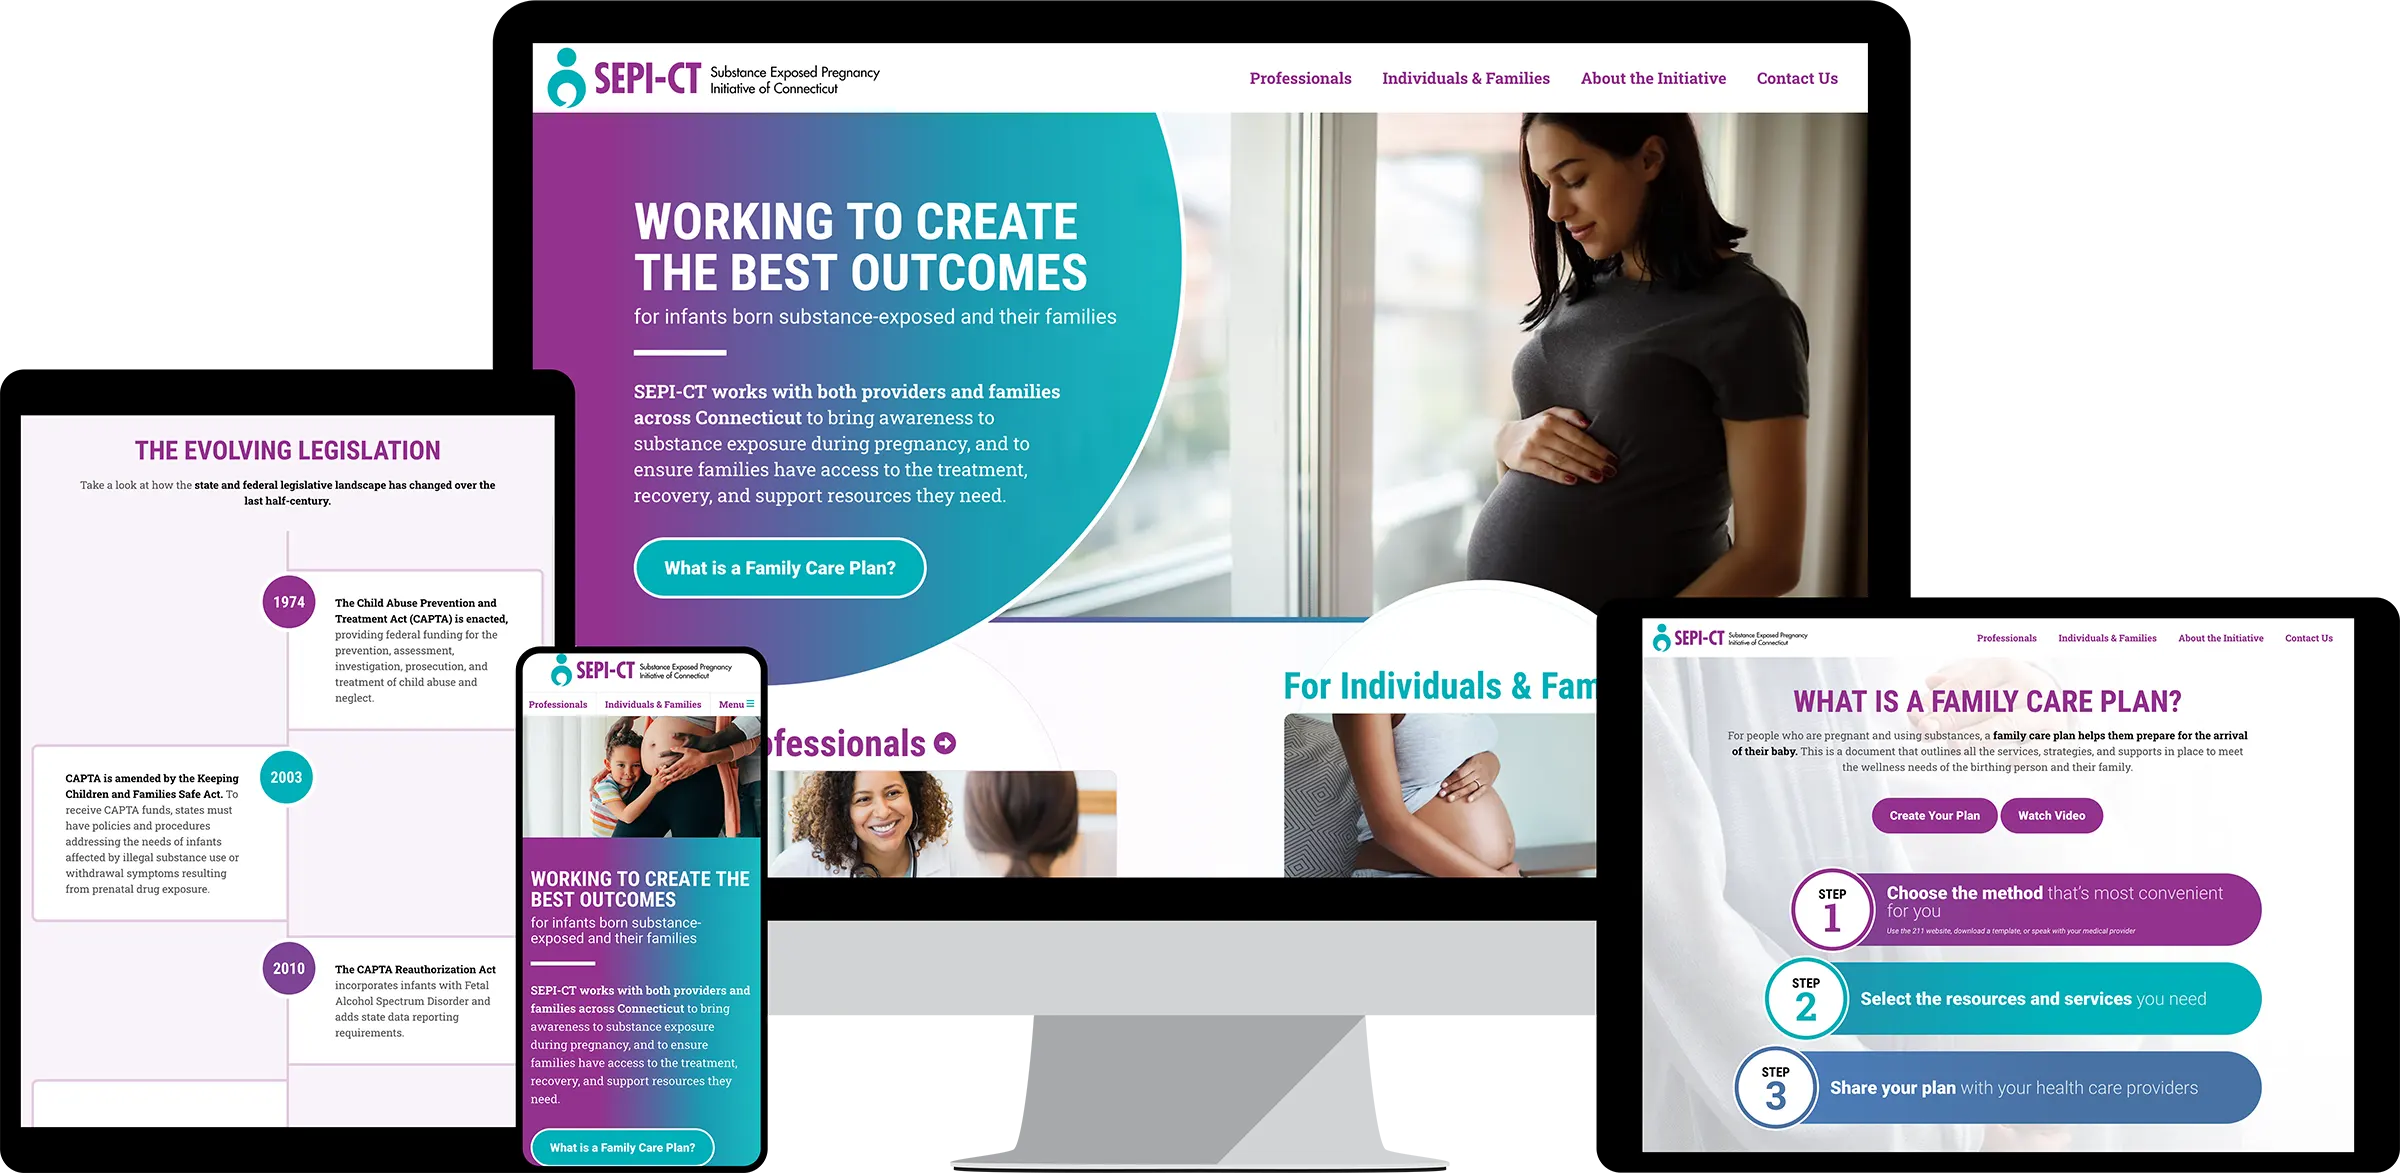 The Substance Exposed Pregnancy Initiative of Connecticut (SEPI-CT) Website Pages